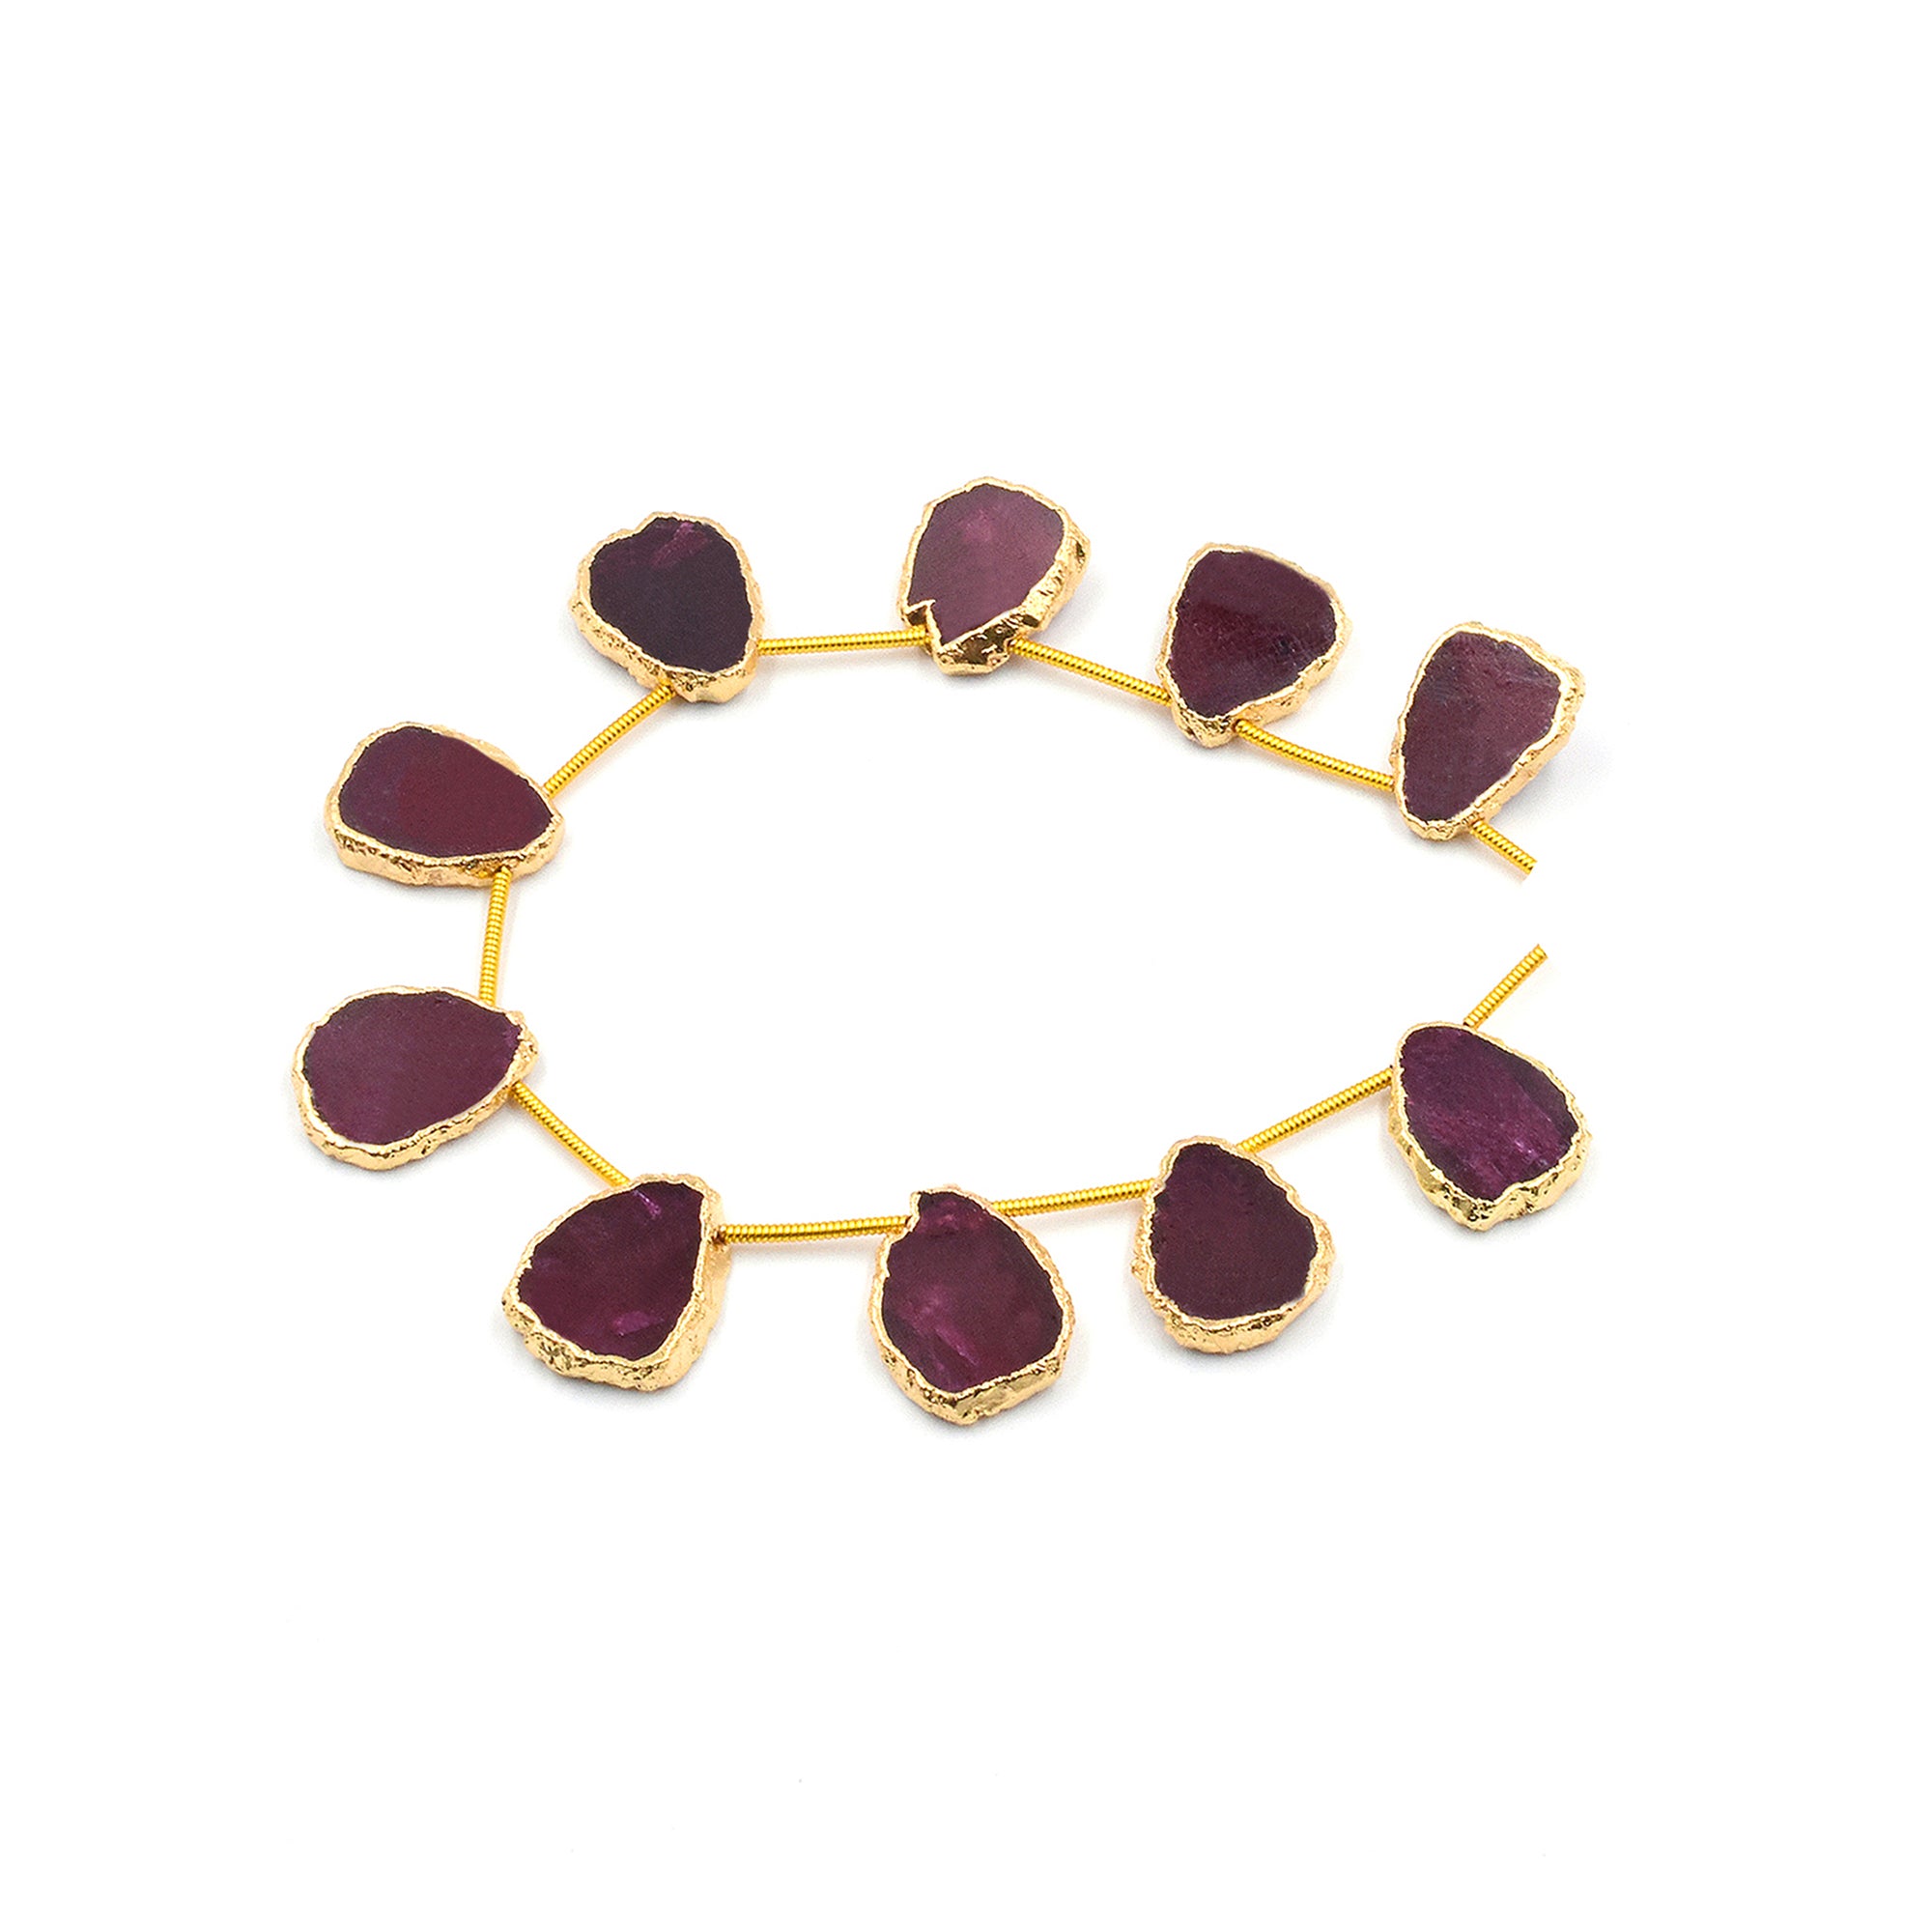 Ruby Corundum 15X11 MM Uneven Shape Side Drilled Gold Electroplated Strand